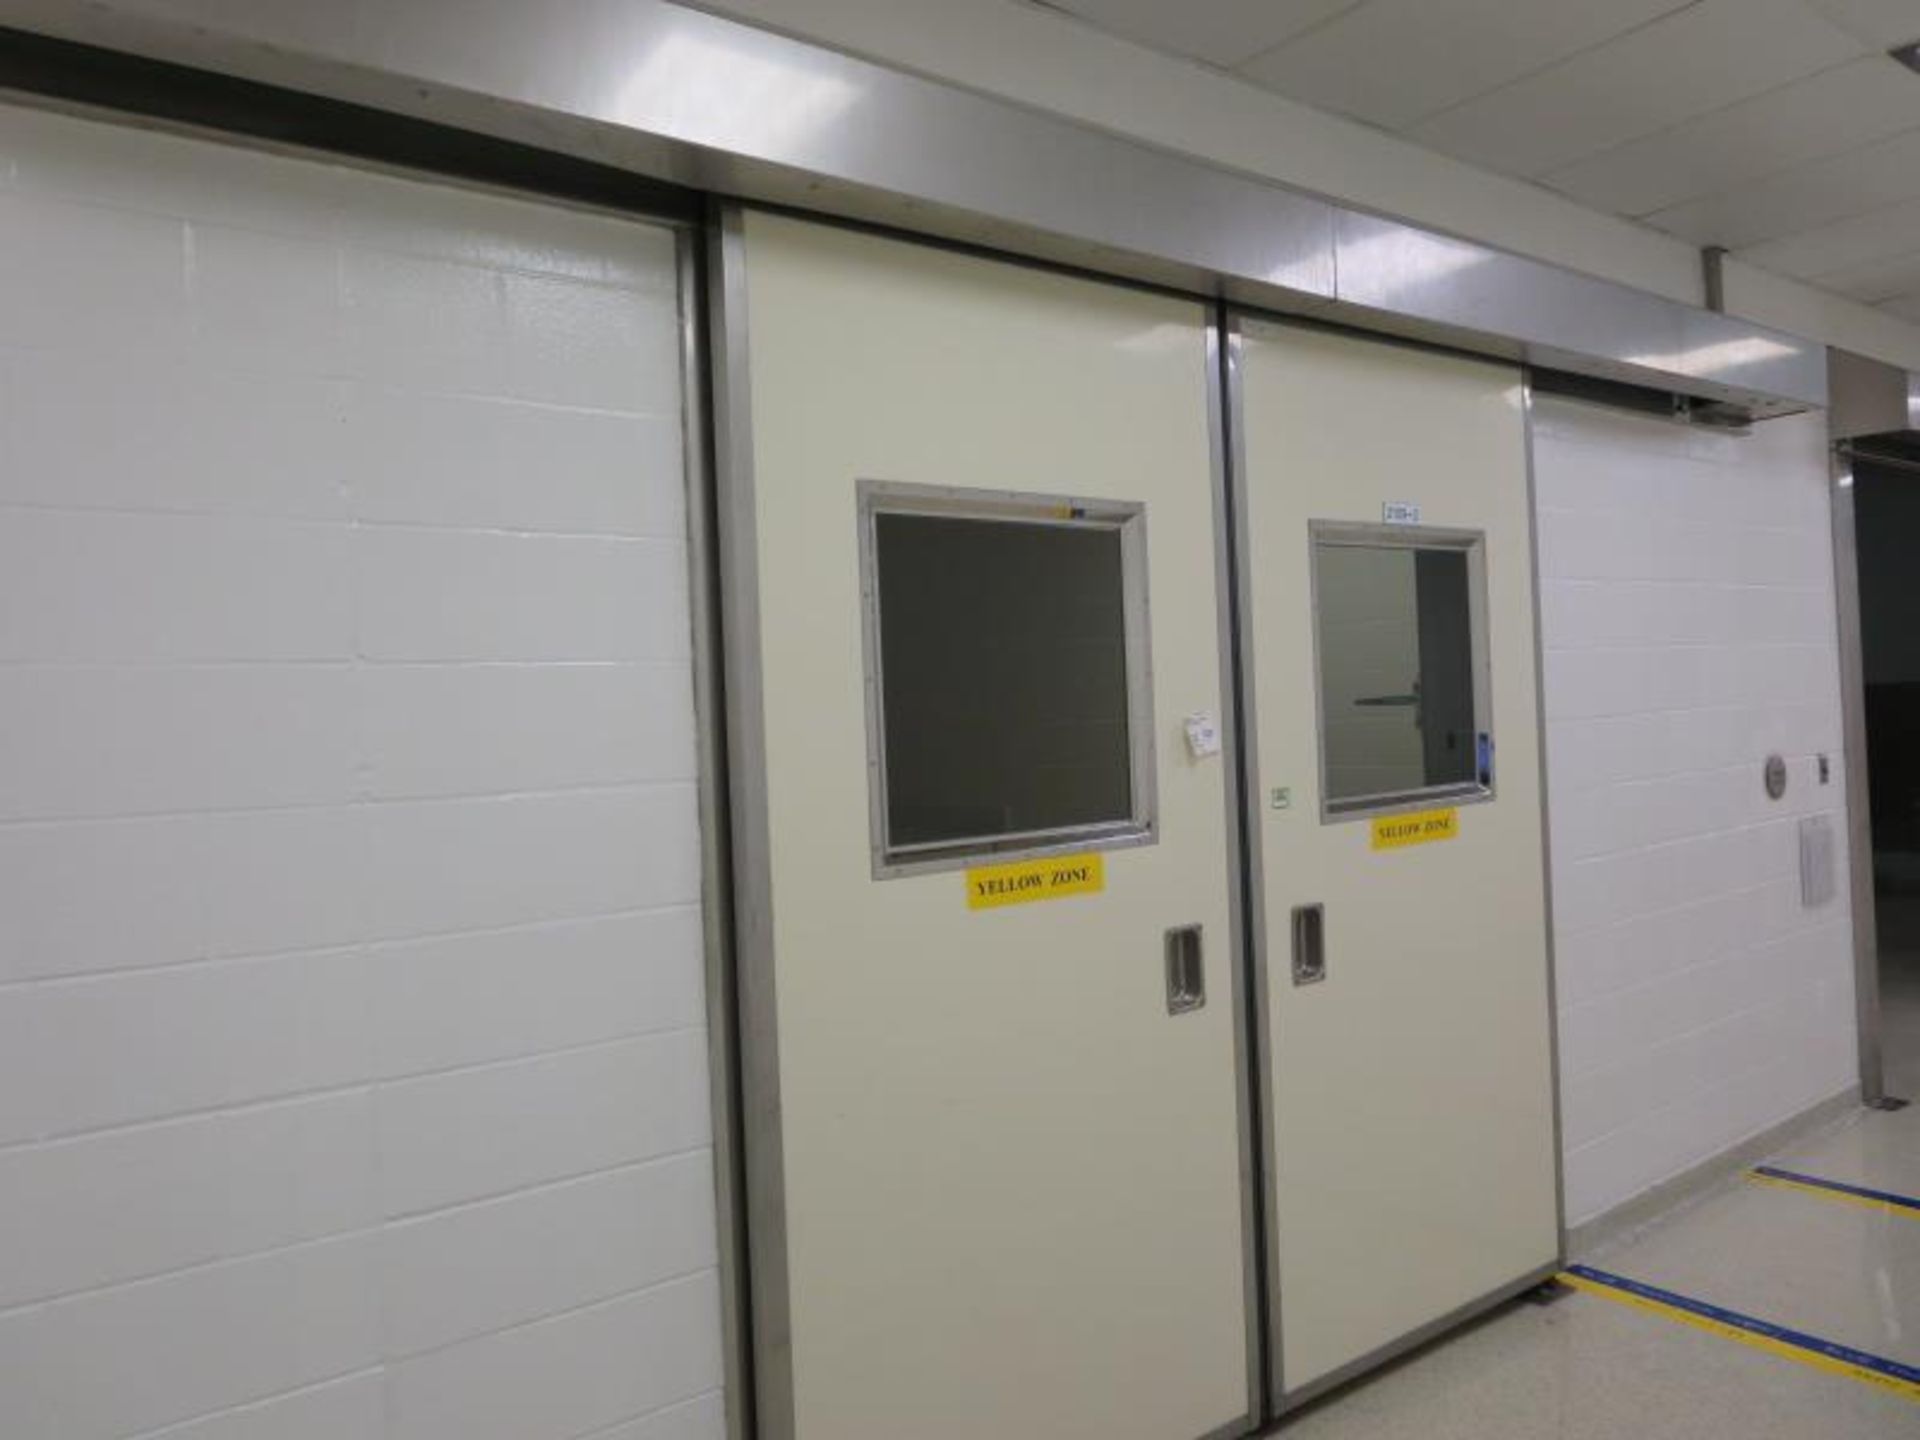 Cleanseal Automatic Double Sliding Door; 92"w x 99" h. Controlled Environment Doors. HIT# 2226007. - Image 2 of 3